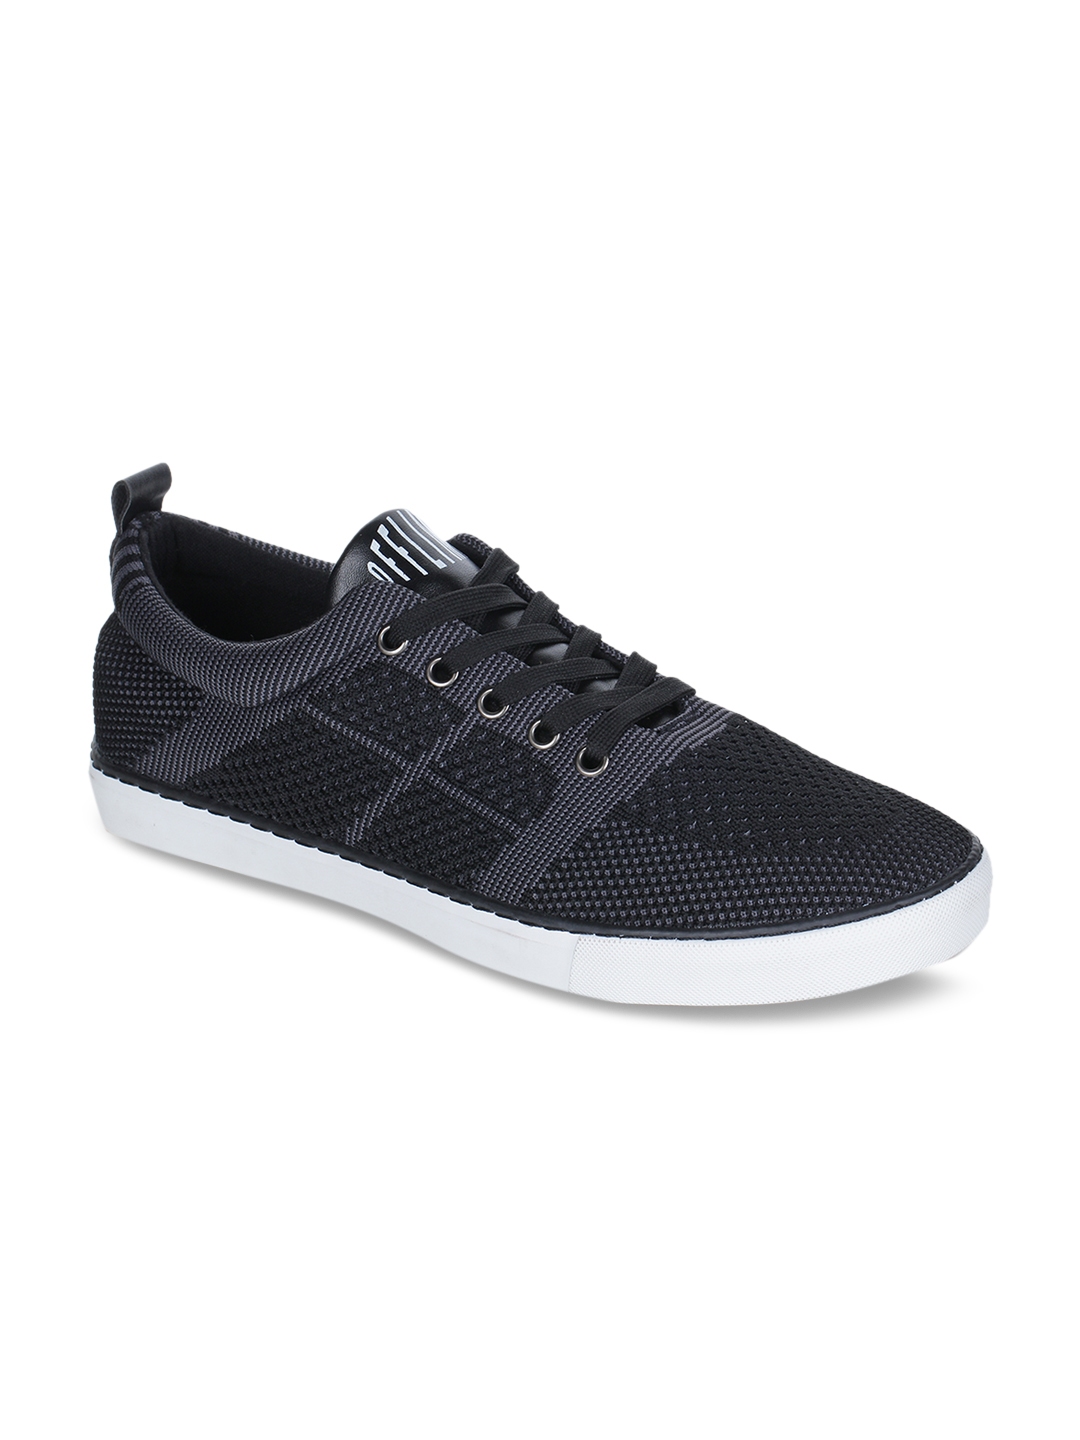 Buy OFF LIMITS Men Black Running Shoes - Sports Shoes for Men 8513981 ...